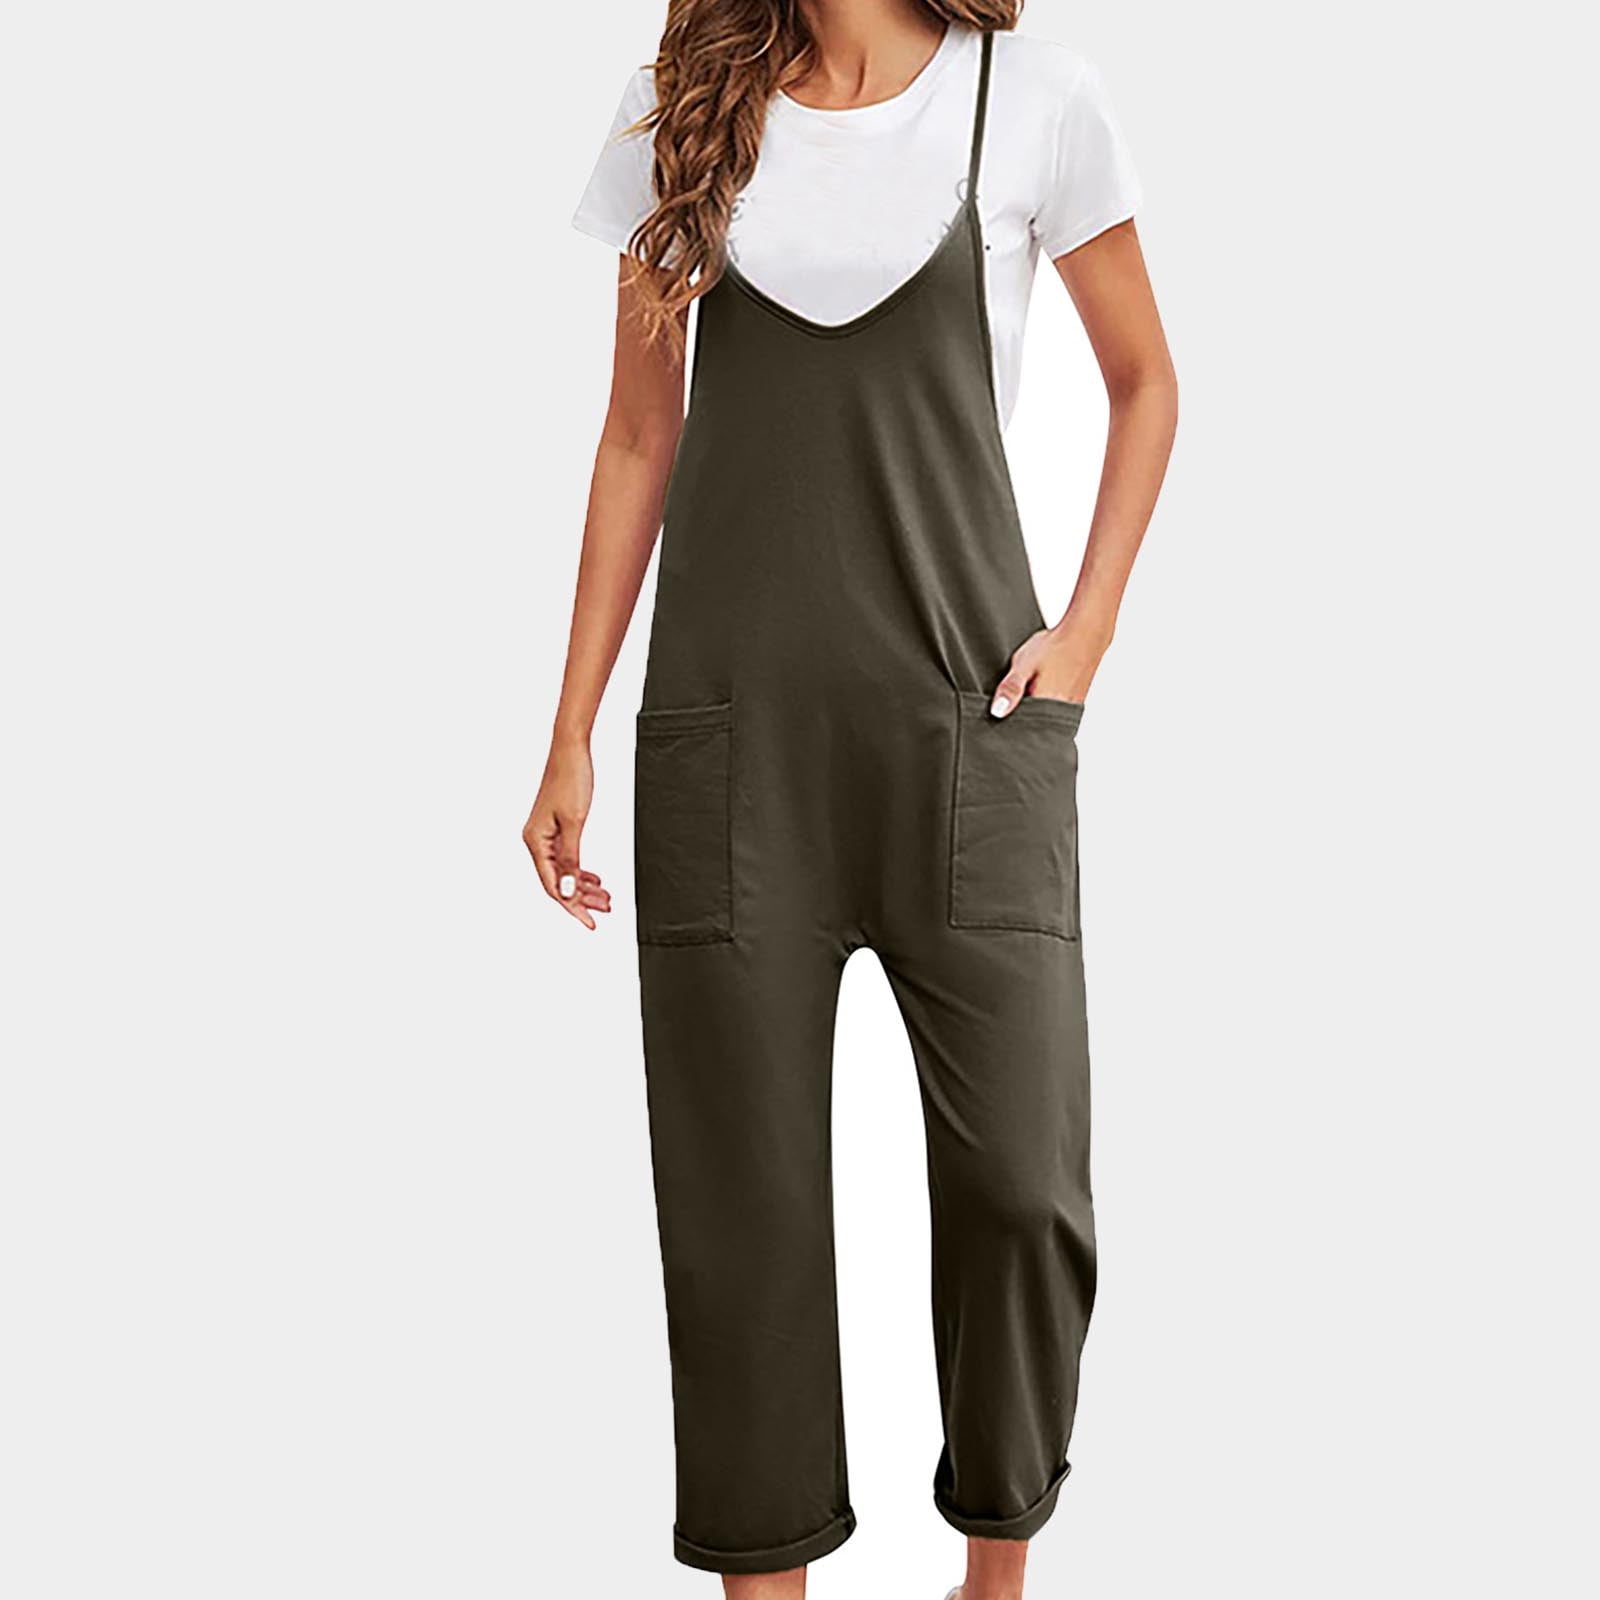 66 Cute Women's Jumpsuits (and my favorite item of clothing) — The  Overwhelmed Mommy Blog